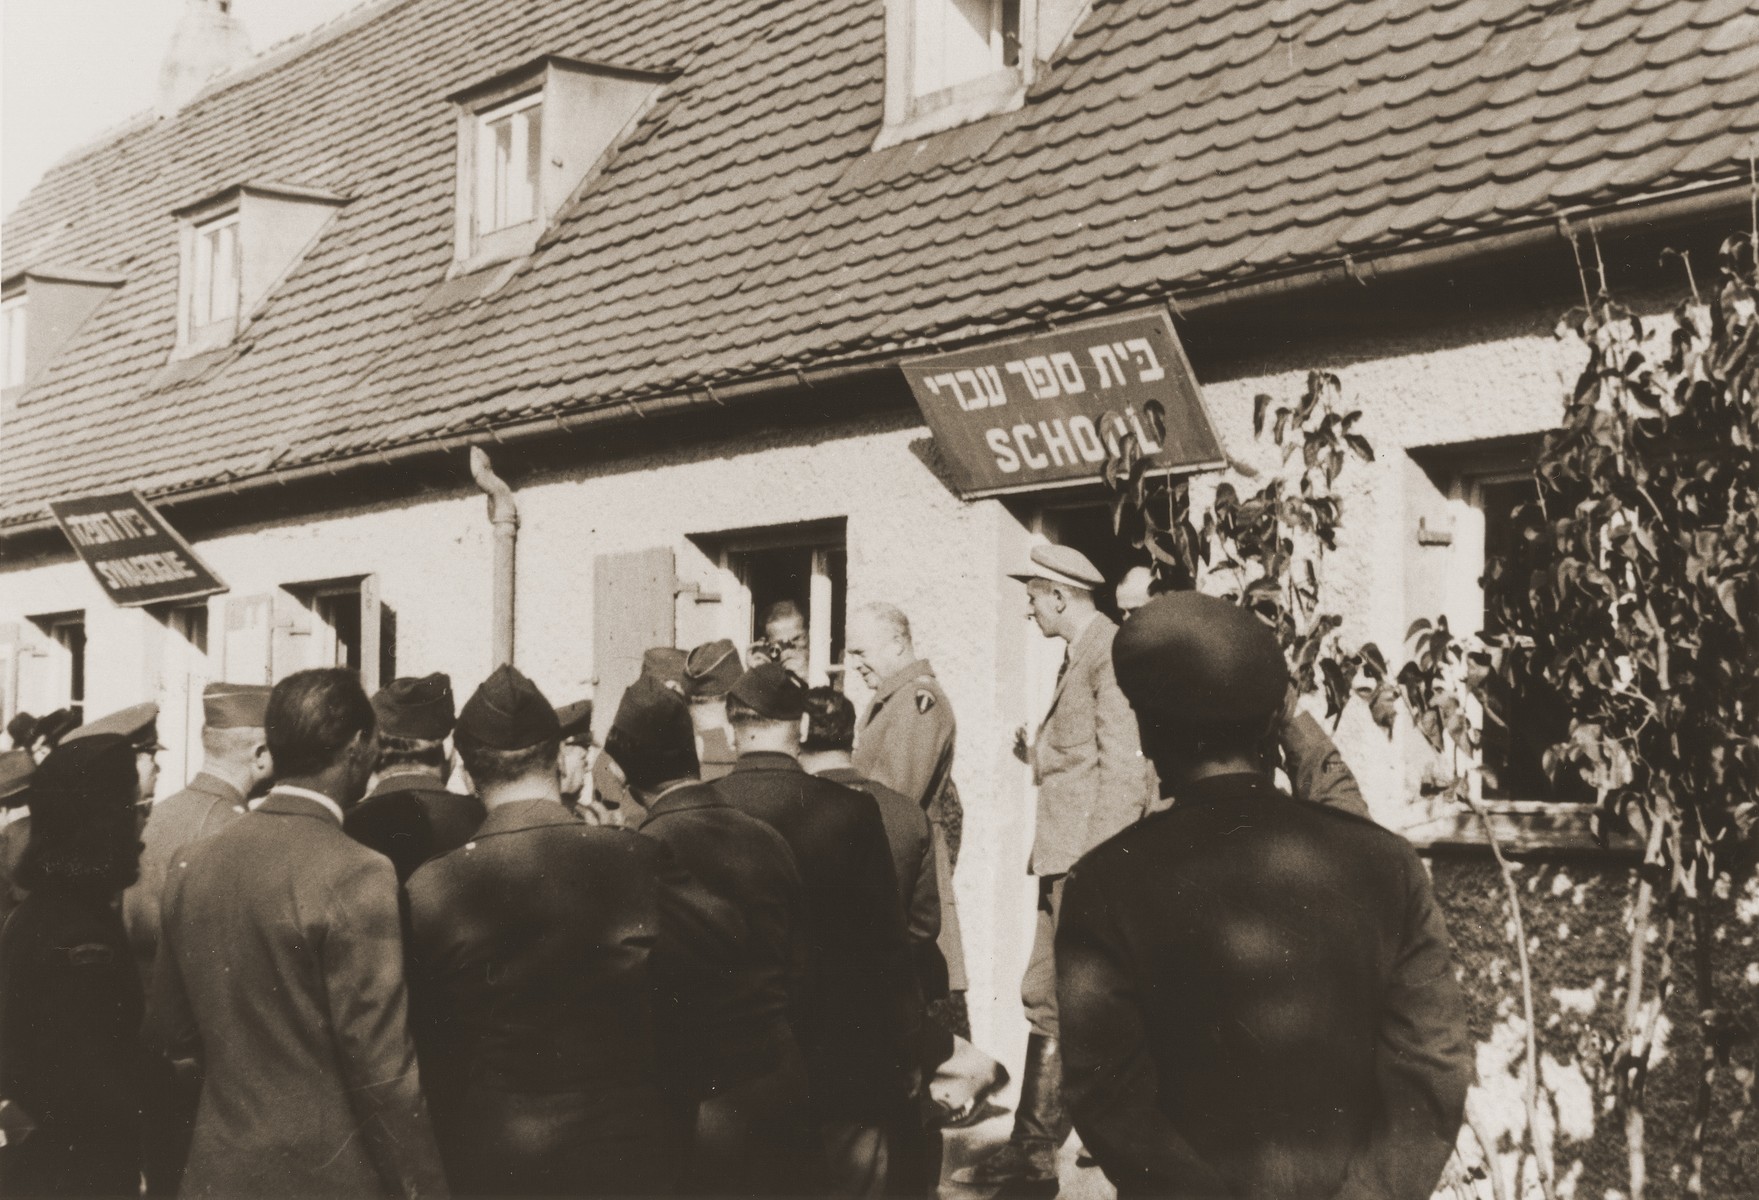 General Dwight Eisenhower visits the school and synagogue during an official tour of the Neu Freimann displaced persons camp.